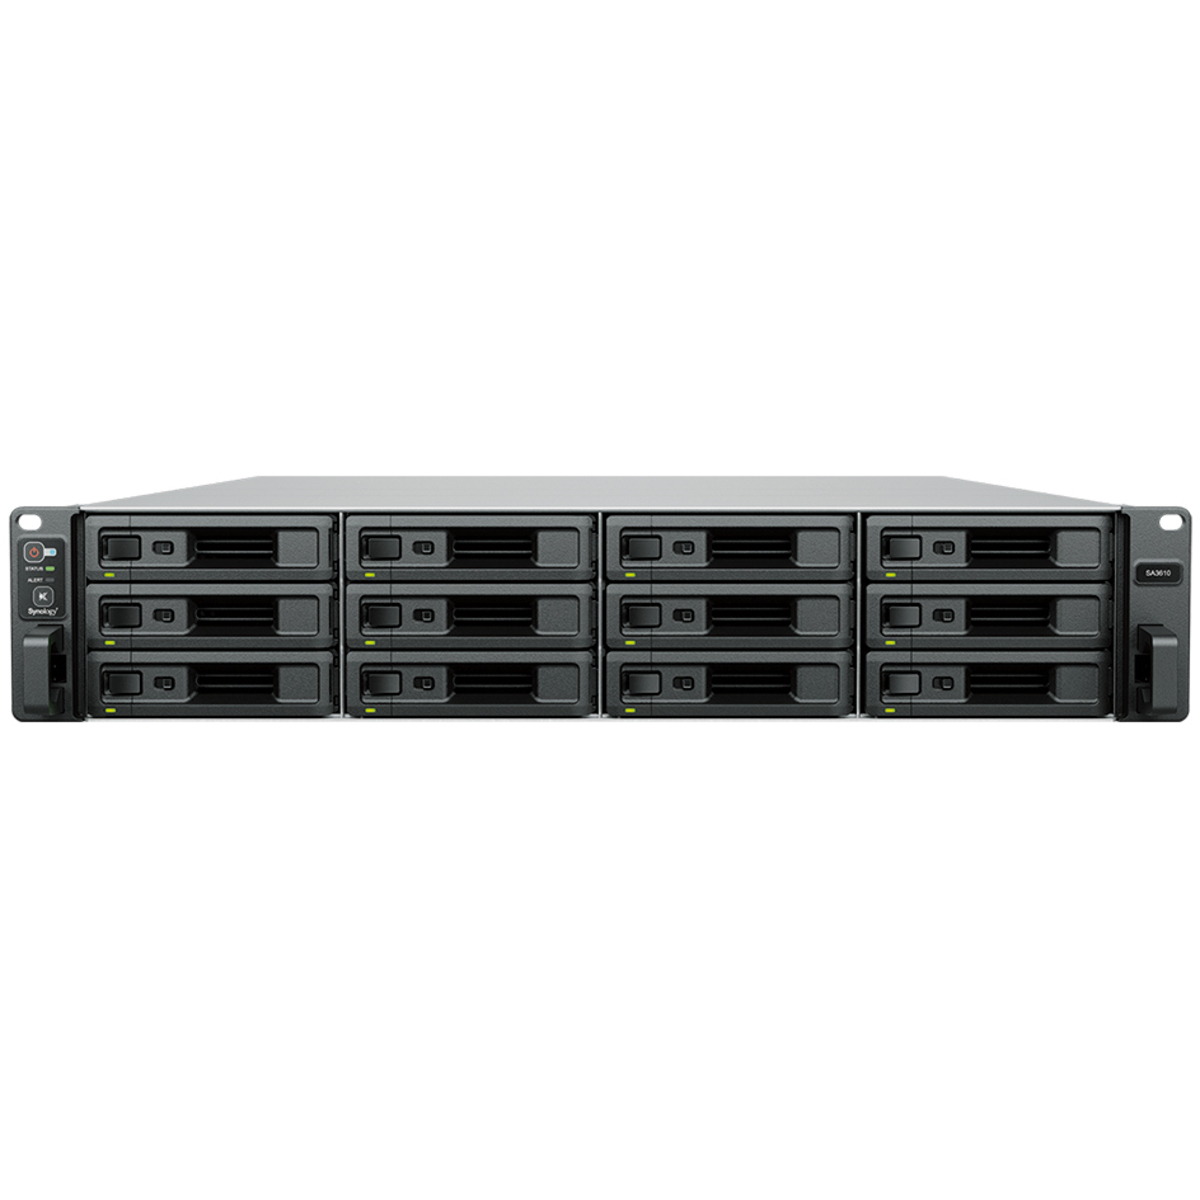 Synology RackStation SA3410 100tb 12-Bay RackMount Large Business / Enterprise NAS - Network Attached Storage Device 10x10tb Seagate IronWolf Pro ST10000NT001 3.5 7200rpm SATA 6Gb/s HDD NAS Class Drives Installed - Burn-In Tested - ON SALE RackStation SA3410